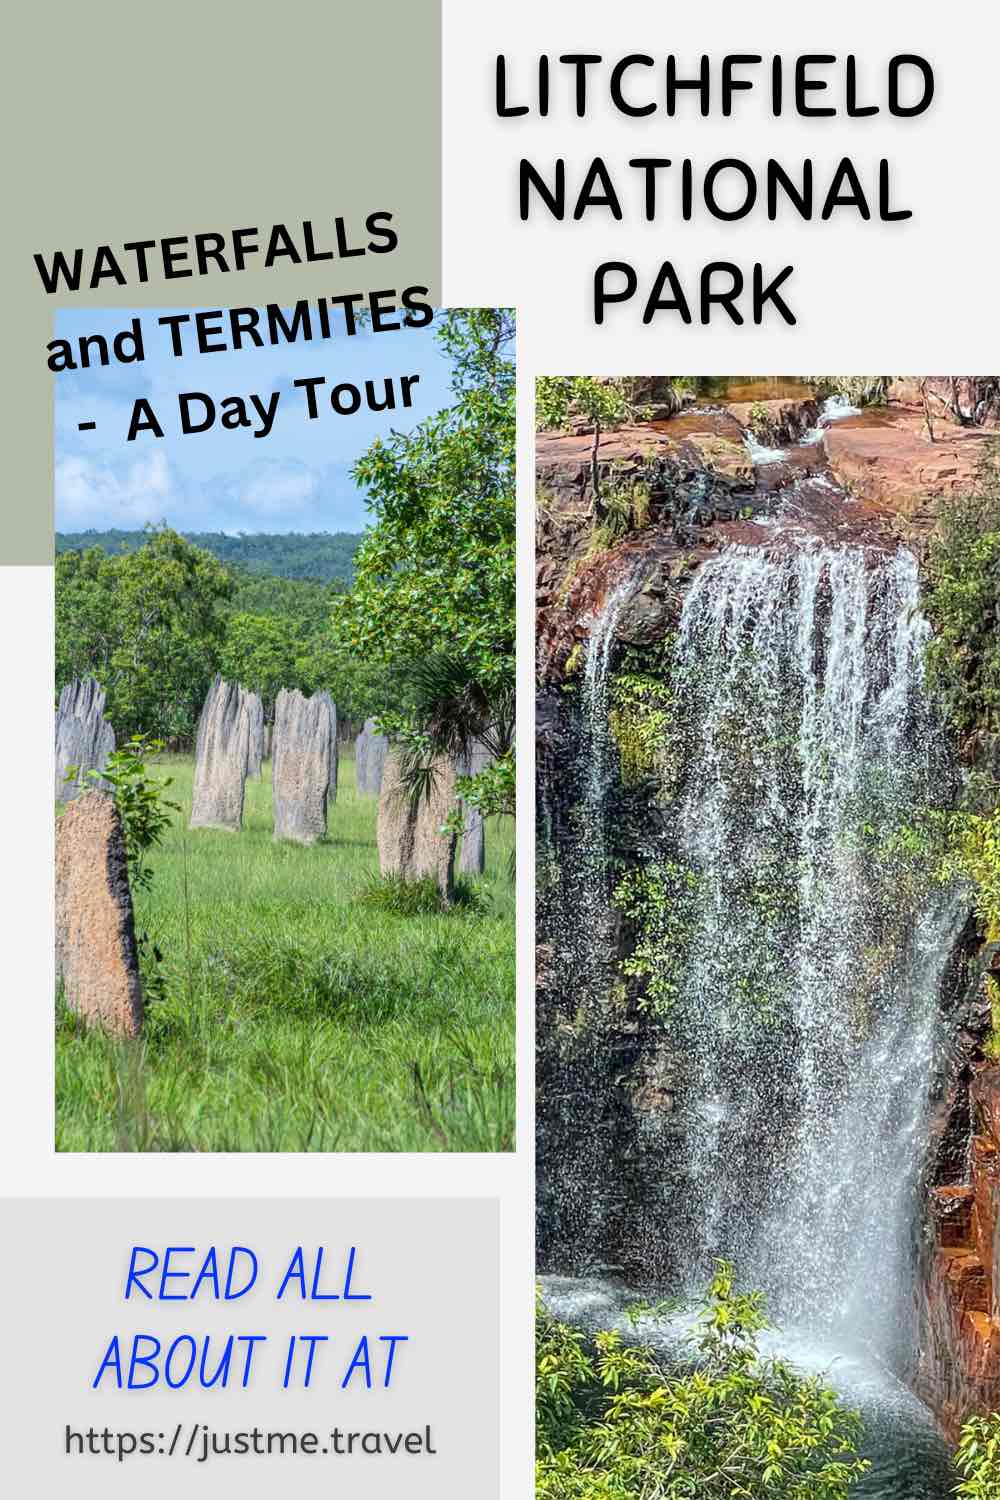 The image shows two photos: a waterfalls dropping into a plunge pool and a flat plain of termite mounds that look like tombstones.